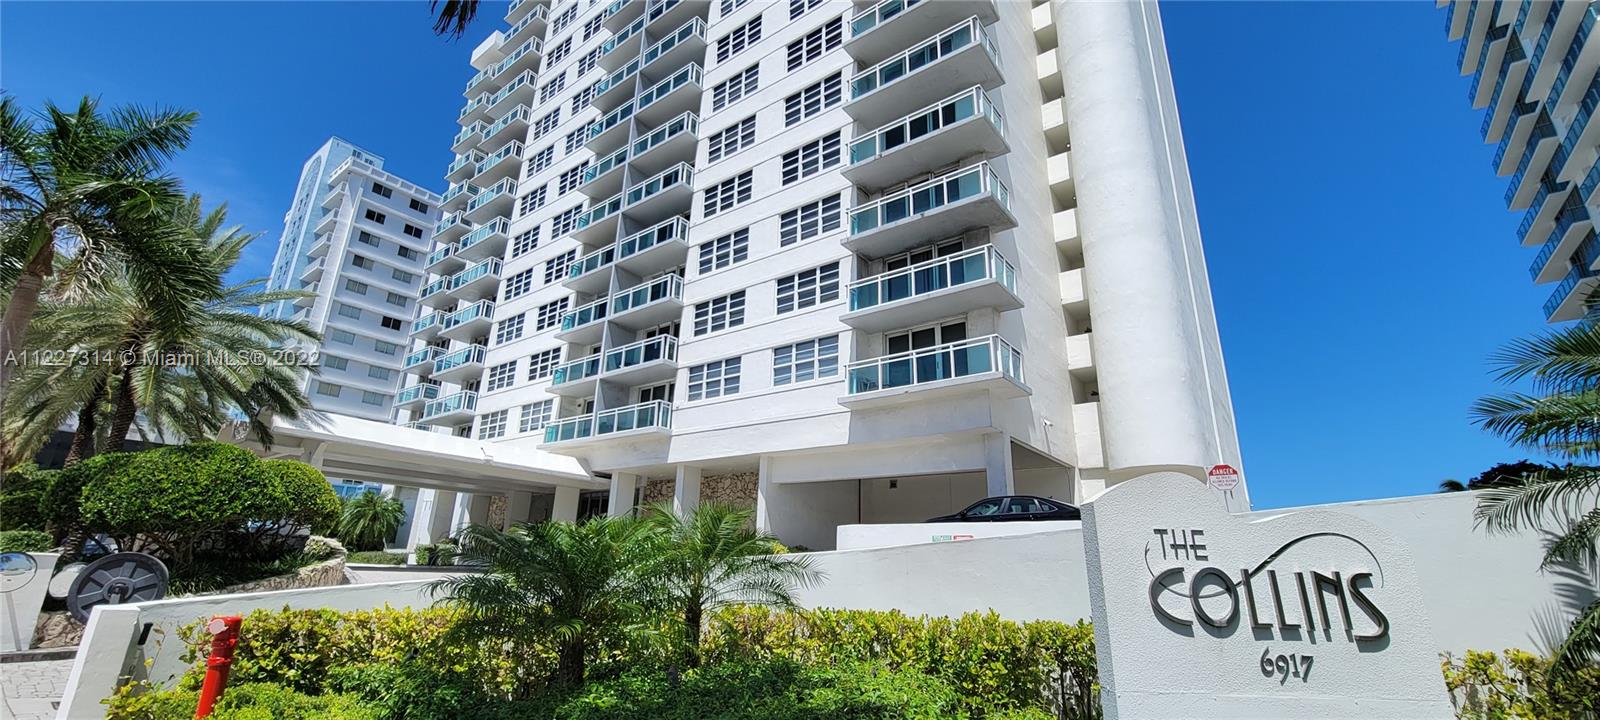 6917  Collins Ave #626 For Sale A11227314, FL